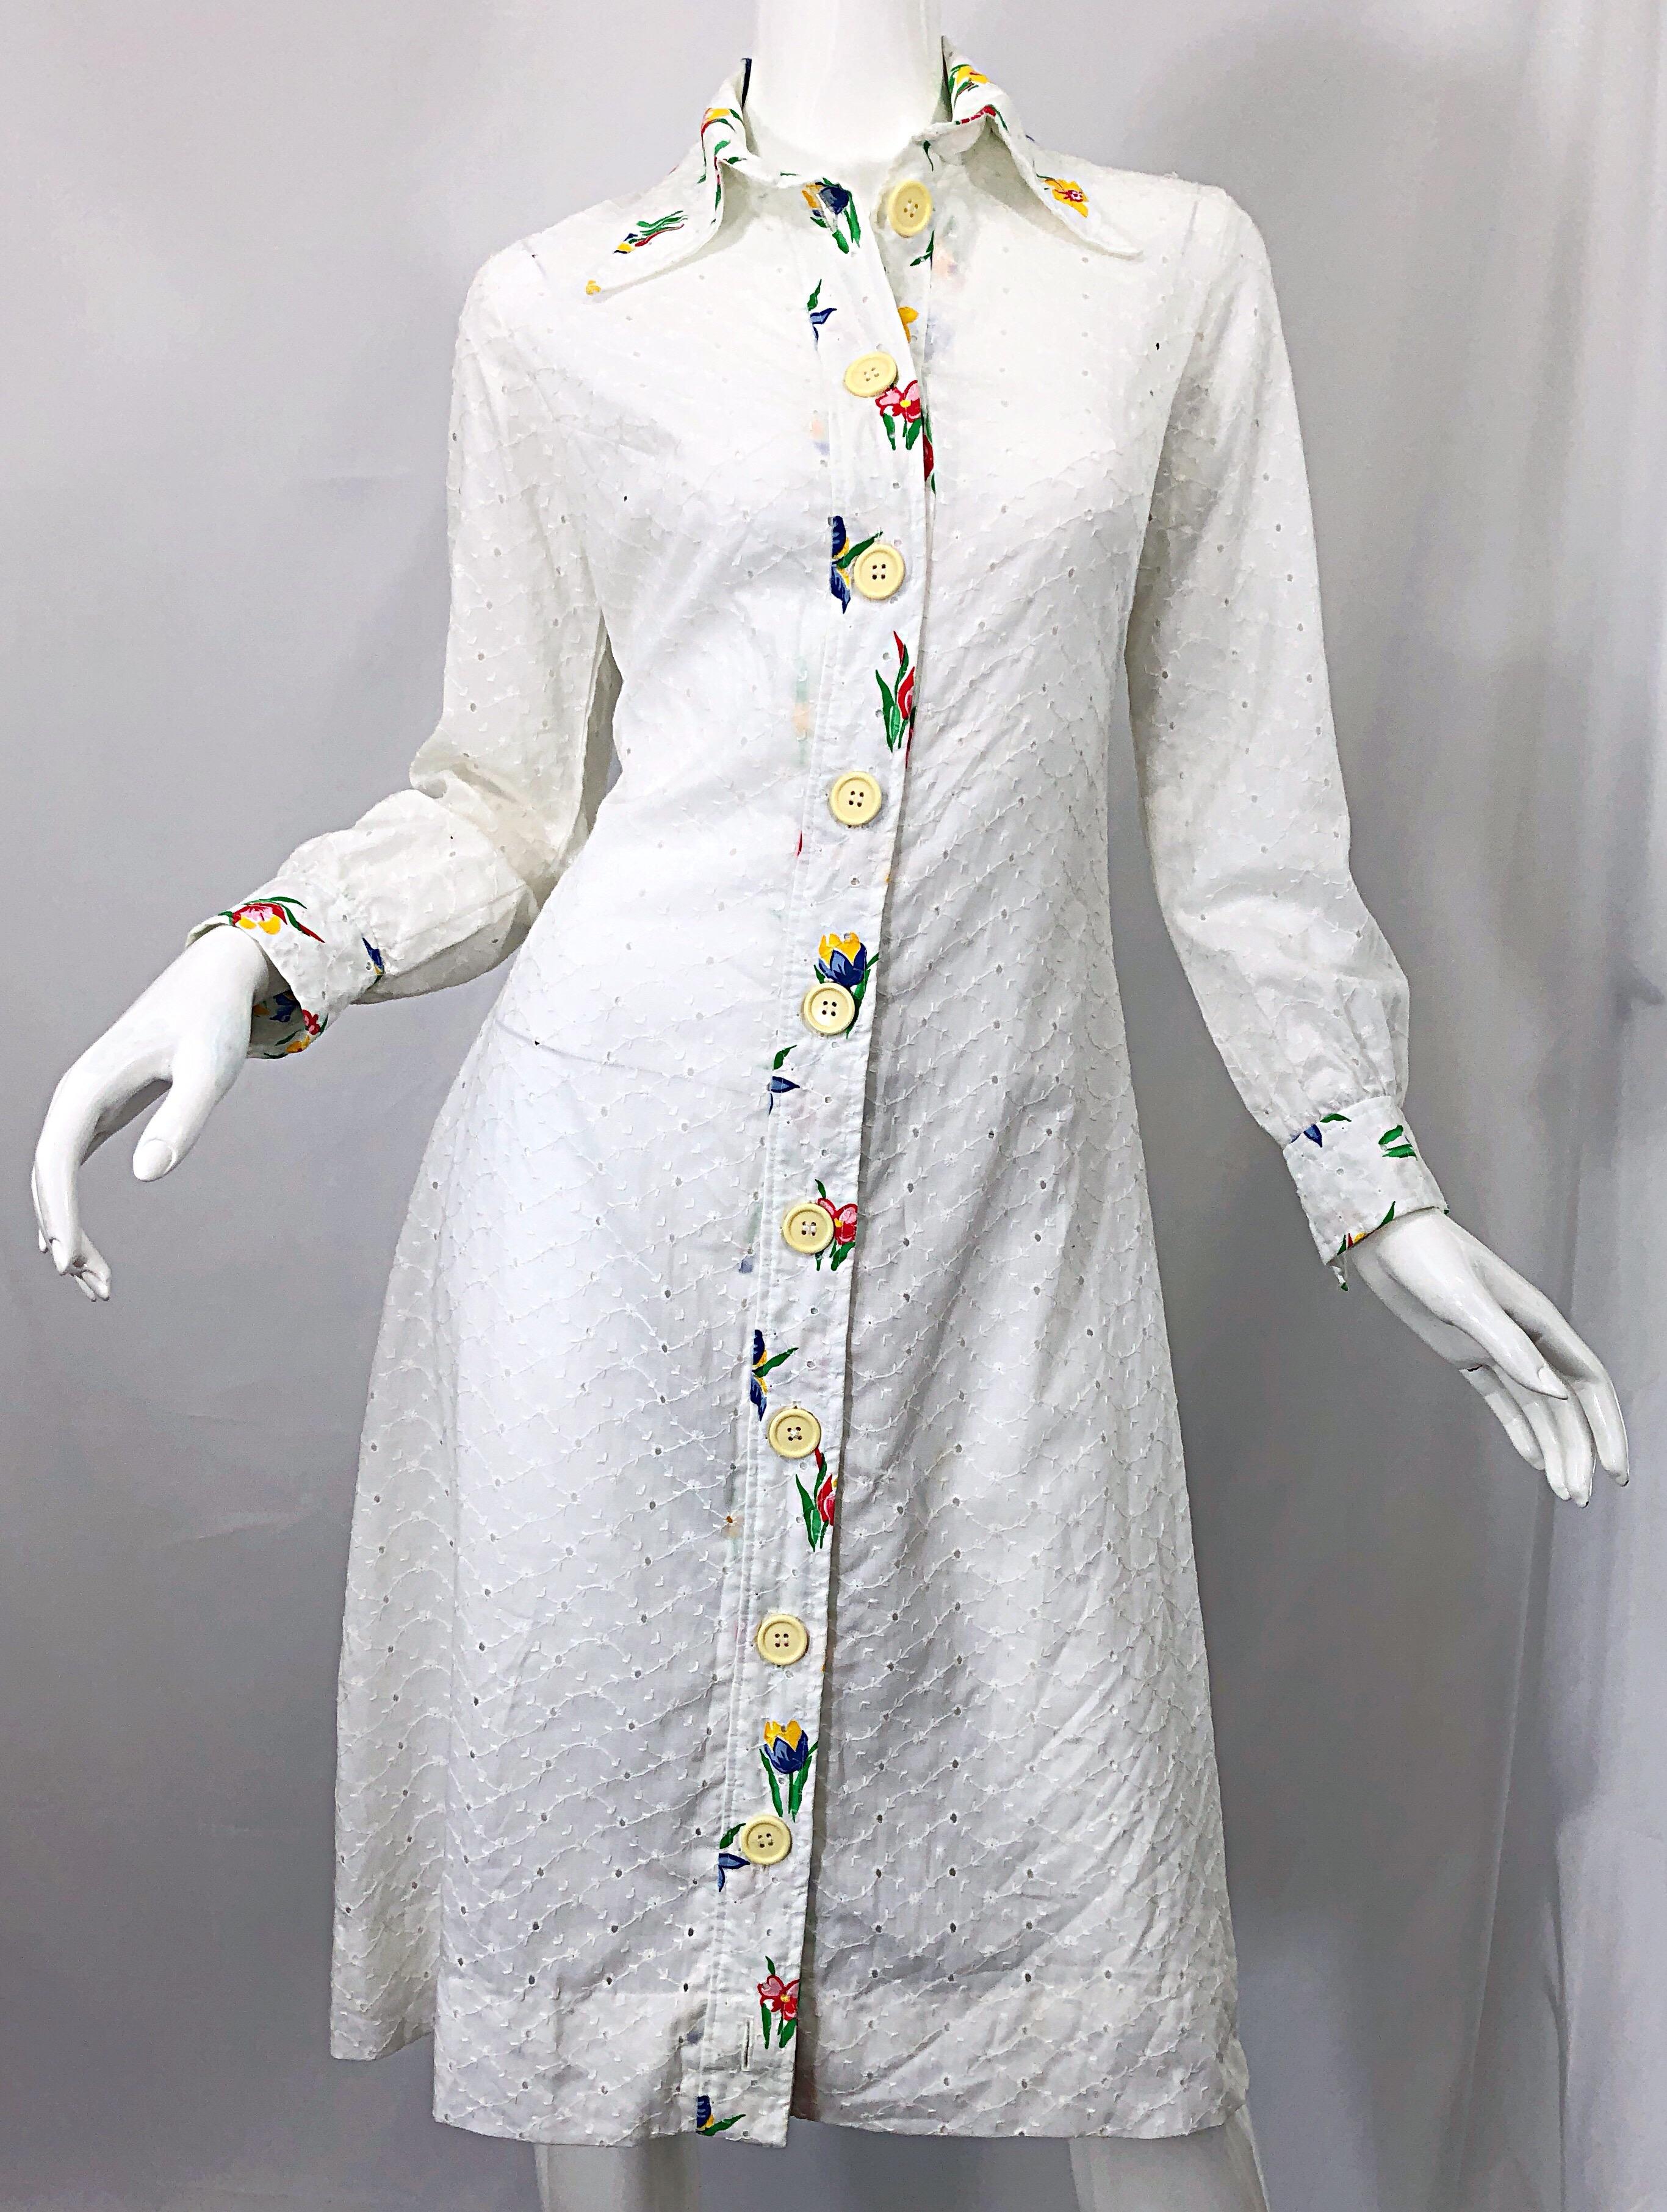 1970s Joseph Magnin White Eyelet Cotton Embrodiered Vintage 70s Shirt Dress For Sale 10